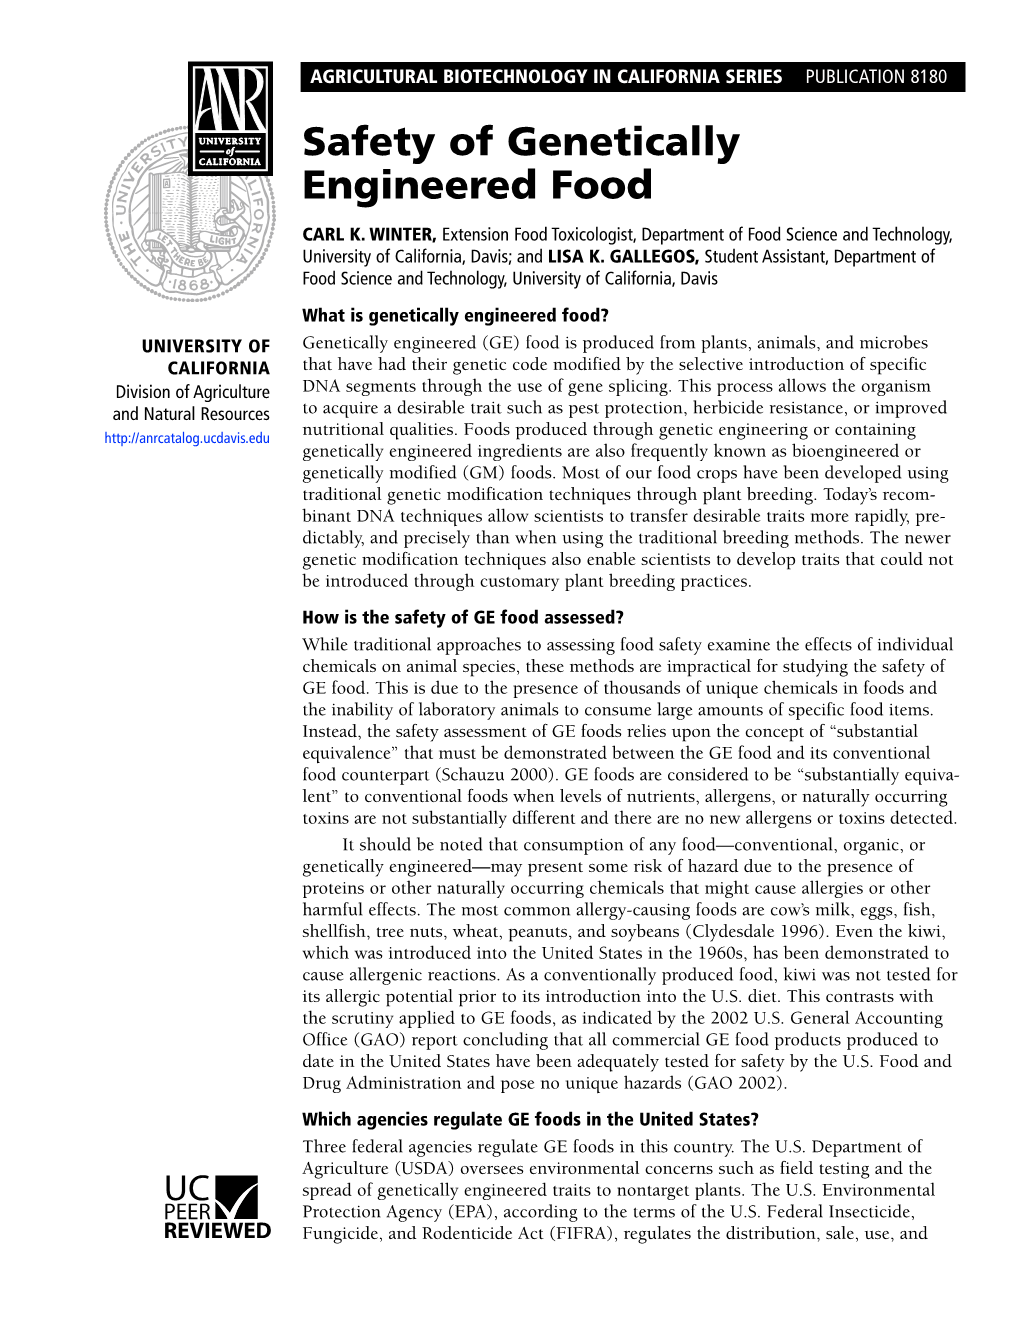 Safety of Genetically Engineered Food